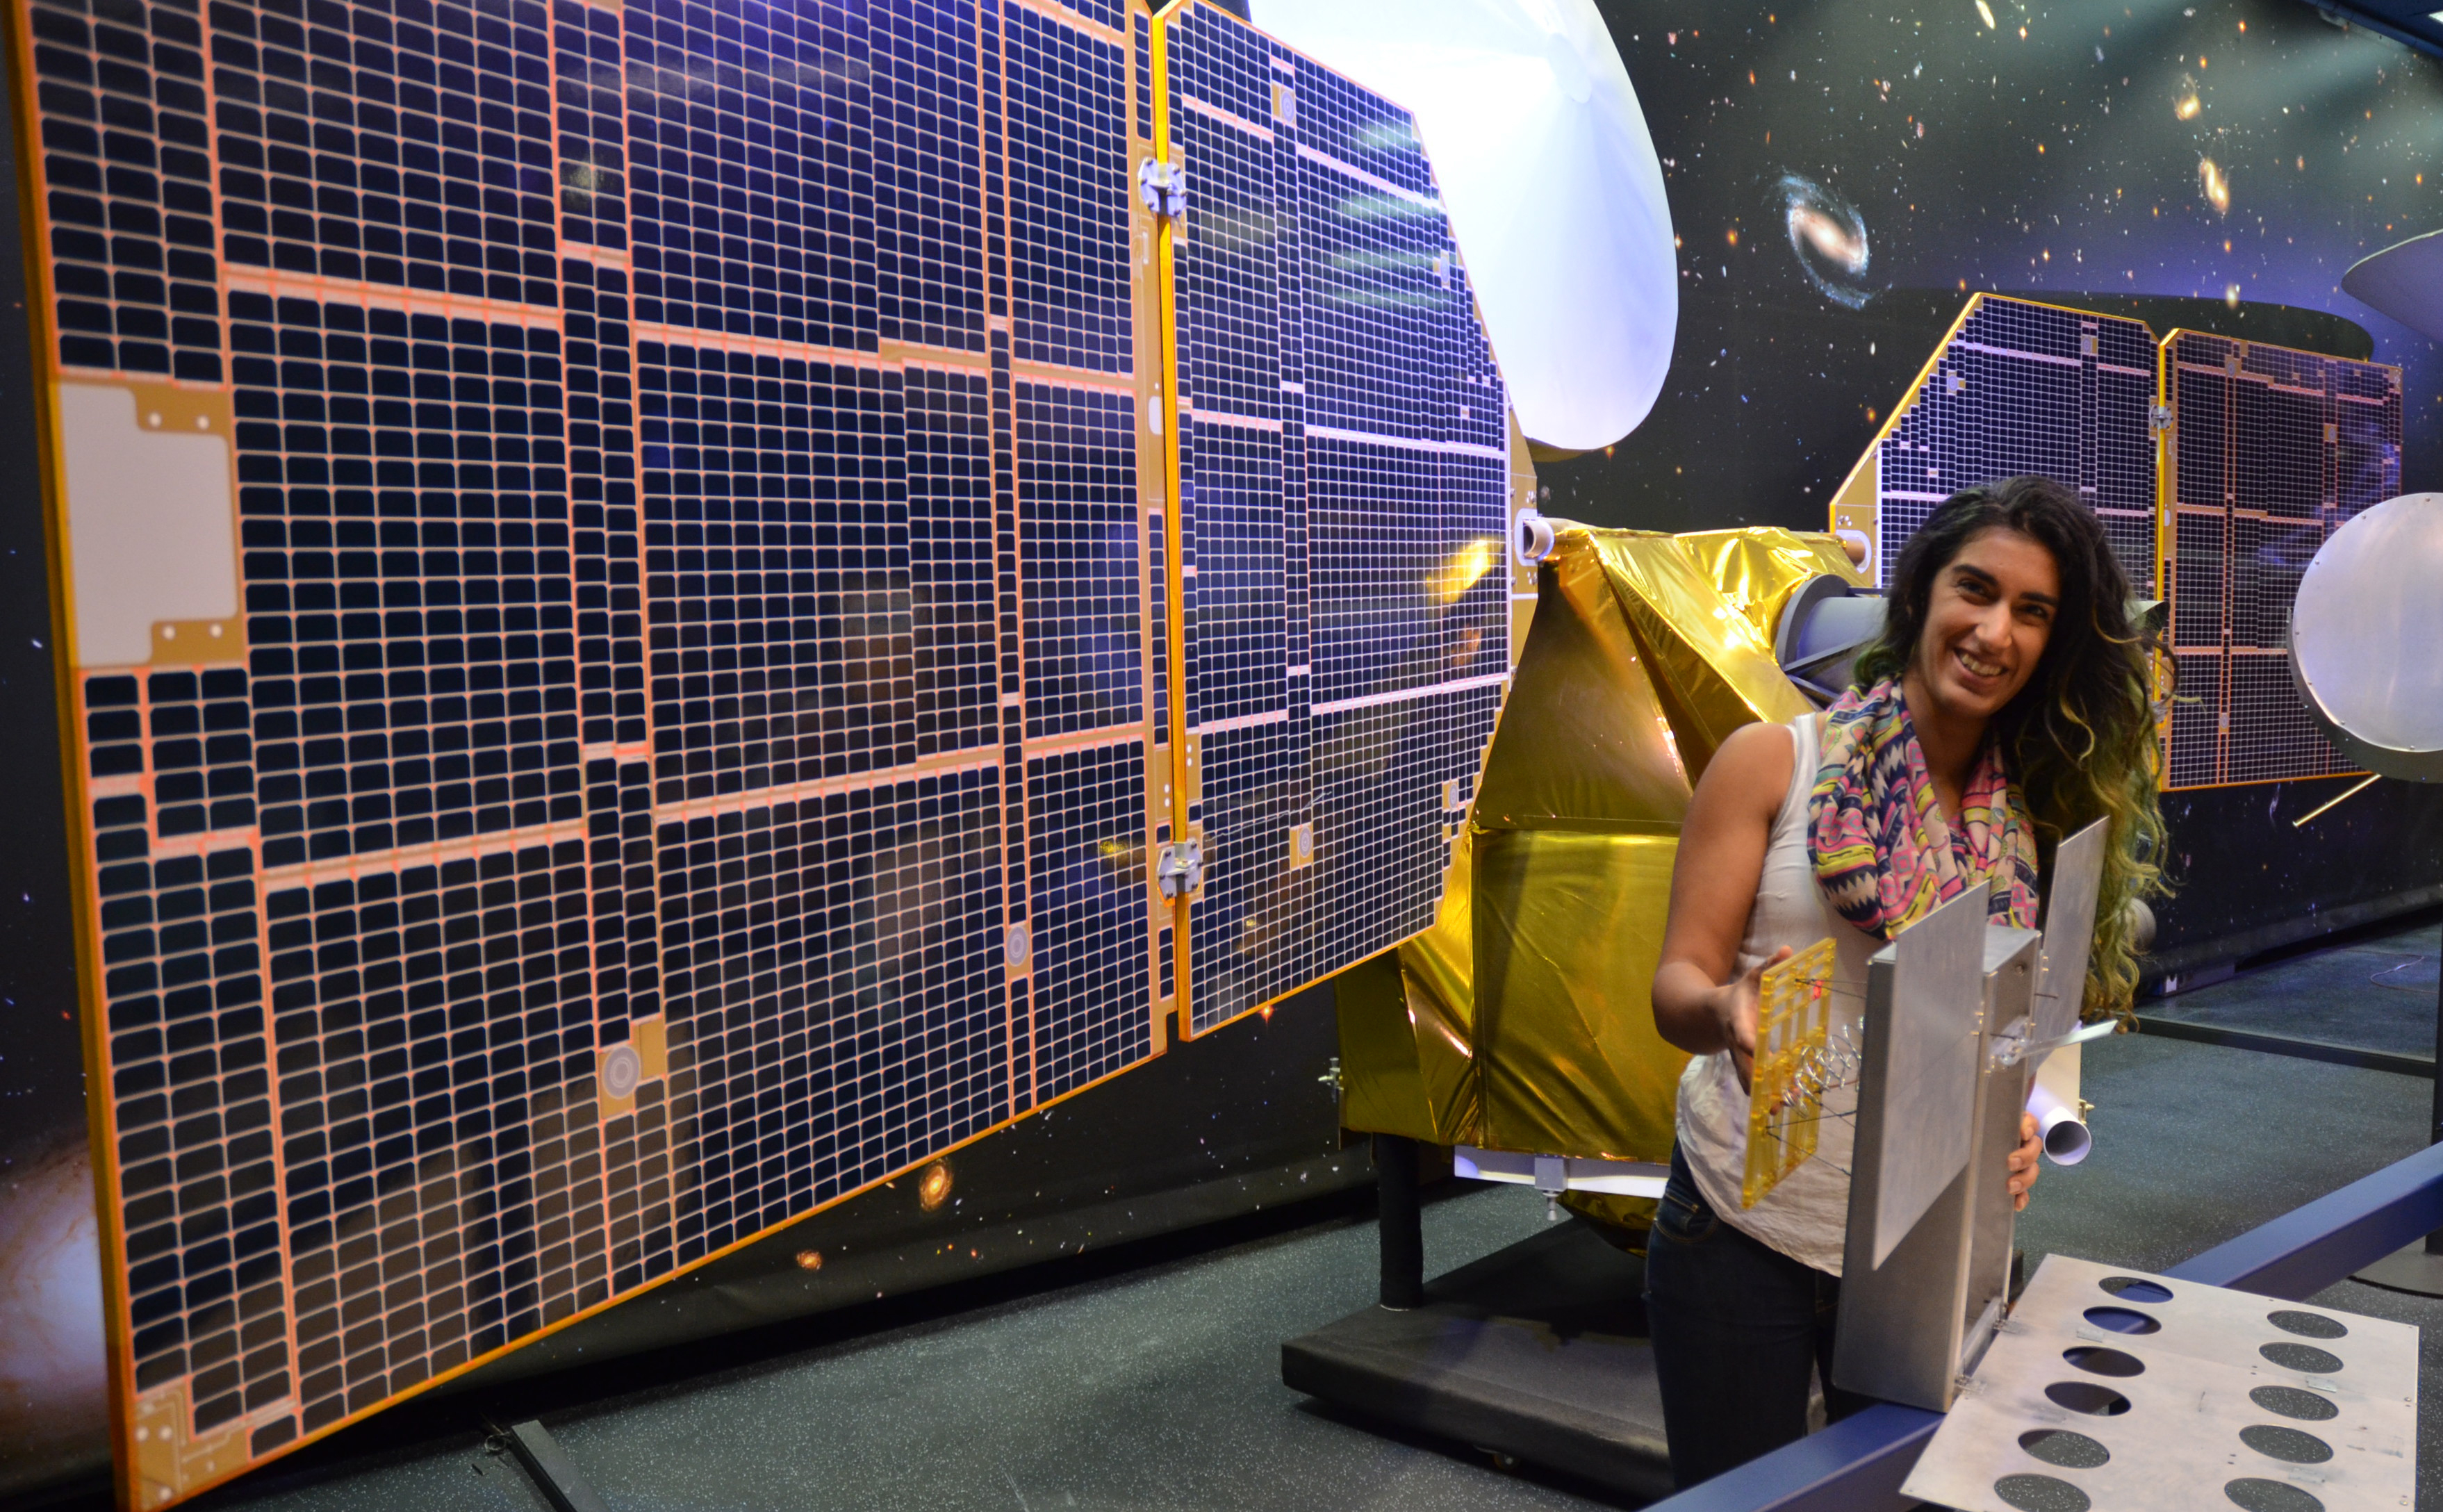 The full-scale mock-up of NASA's MarCO CubeSat held by Farah Alibay, a systems engineer at NASA's Jet Propulsion Laboratory, is dwarfed by the one-half-scale model of NASA's Mars Reconnaissance Orbiter behind her.